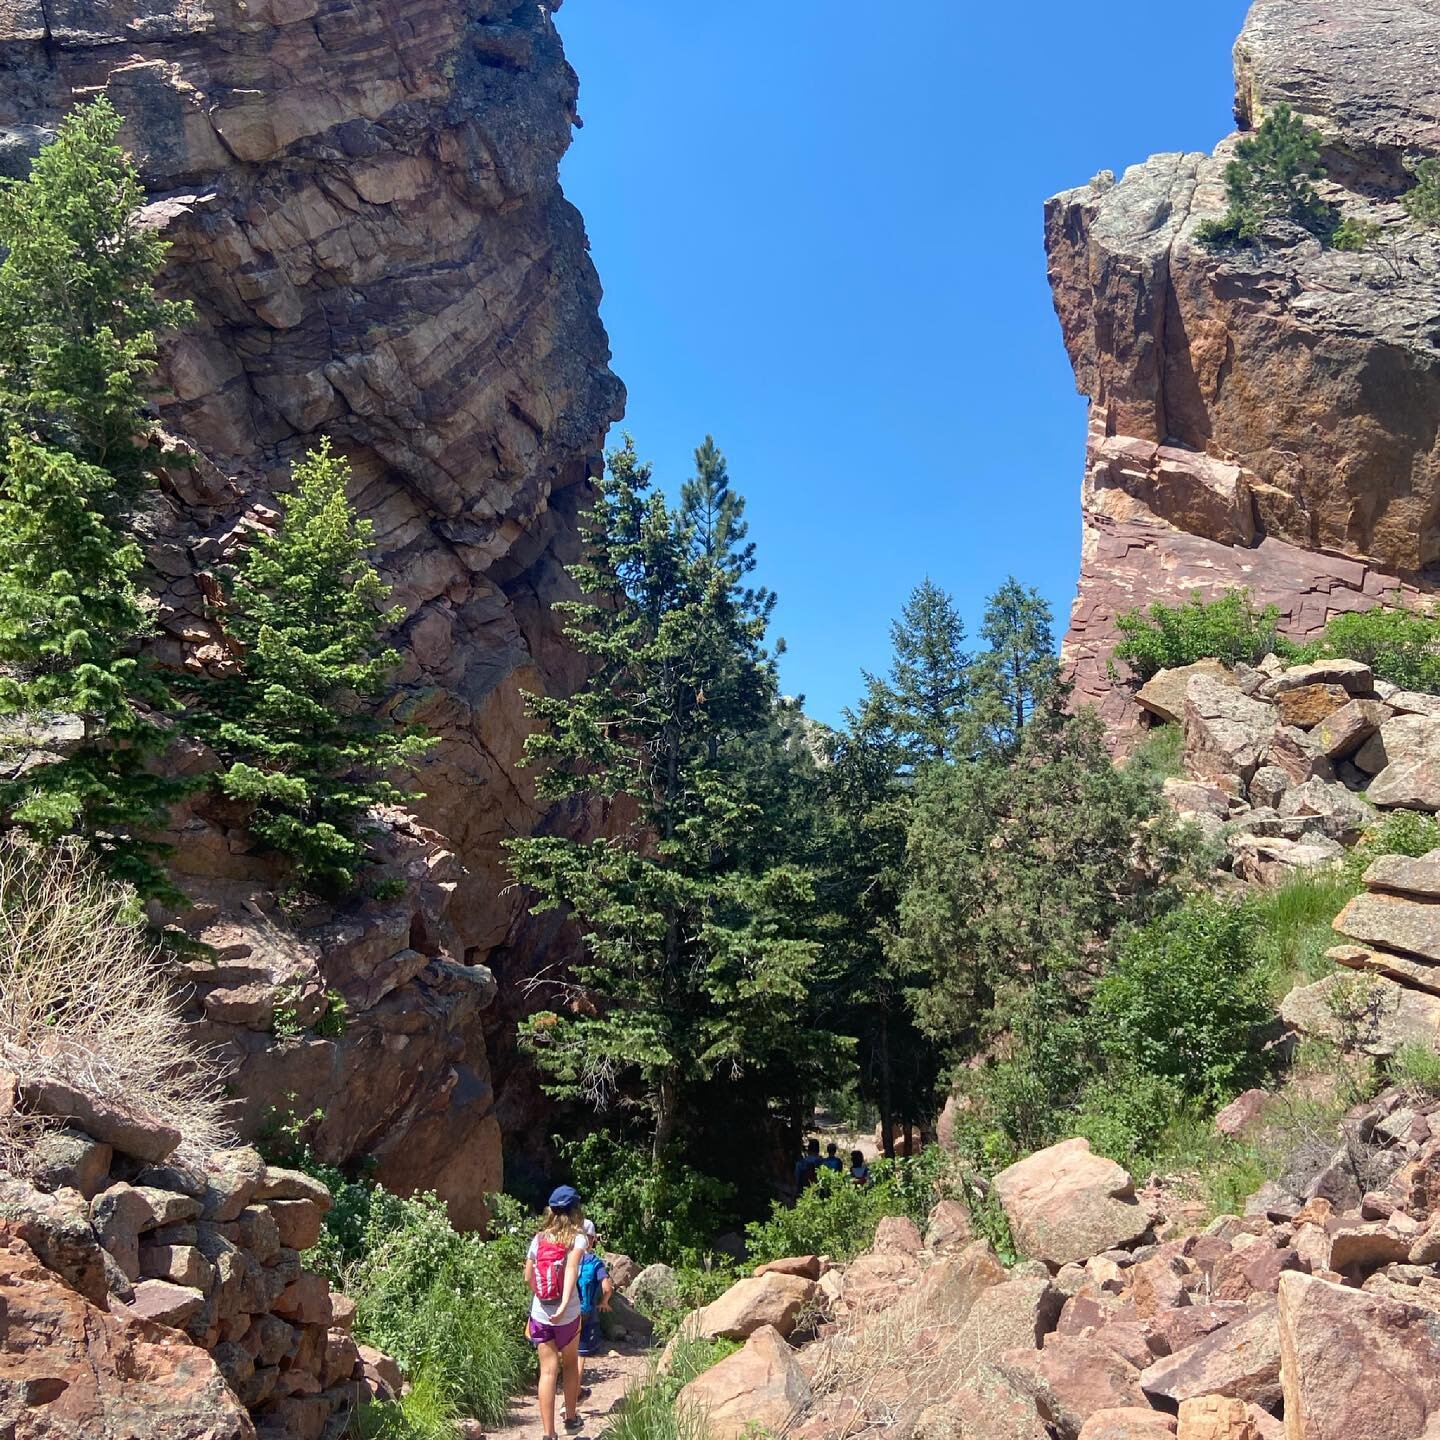 Not too long after we passed through this narrow path between two towering cliffs, my eyes caught a glimpse of two climbers dangling in mid air while in pursuit of the summit.

Evidently the Eldorado Canyon State Park in Colorado invites rock climber